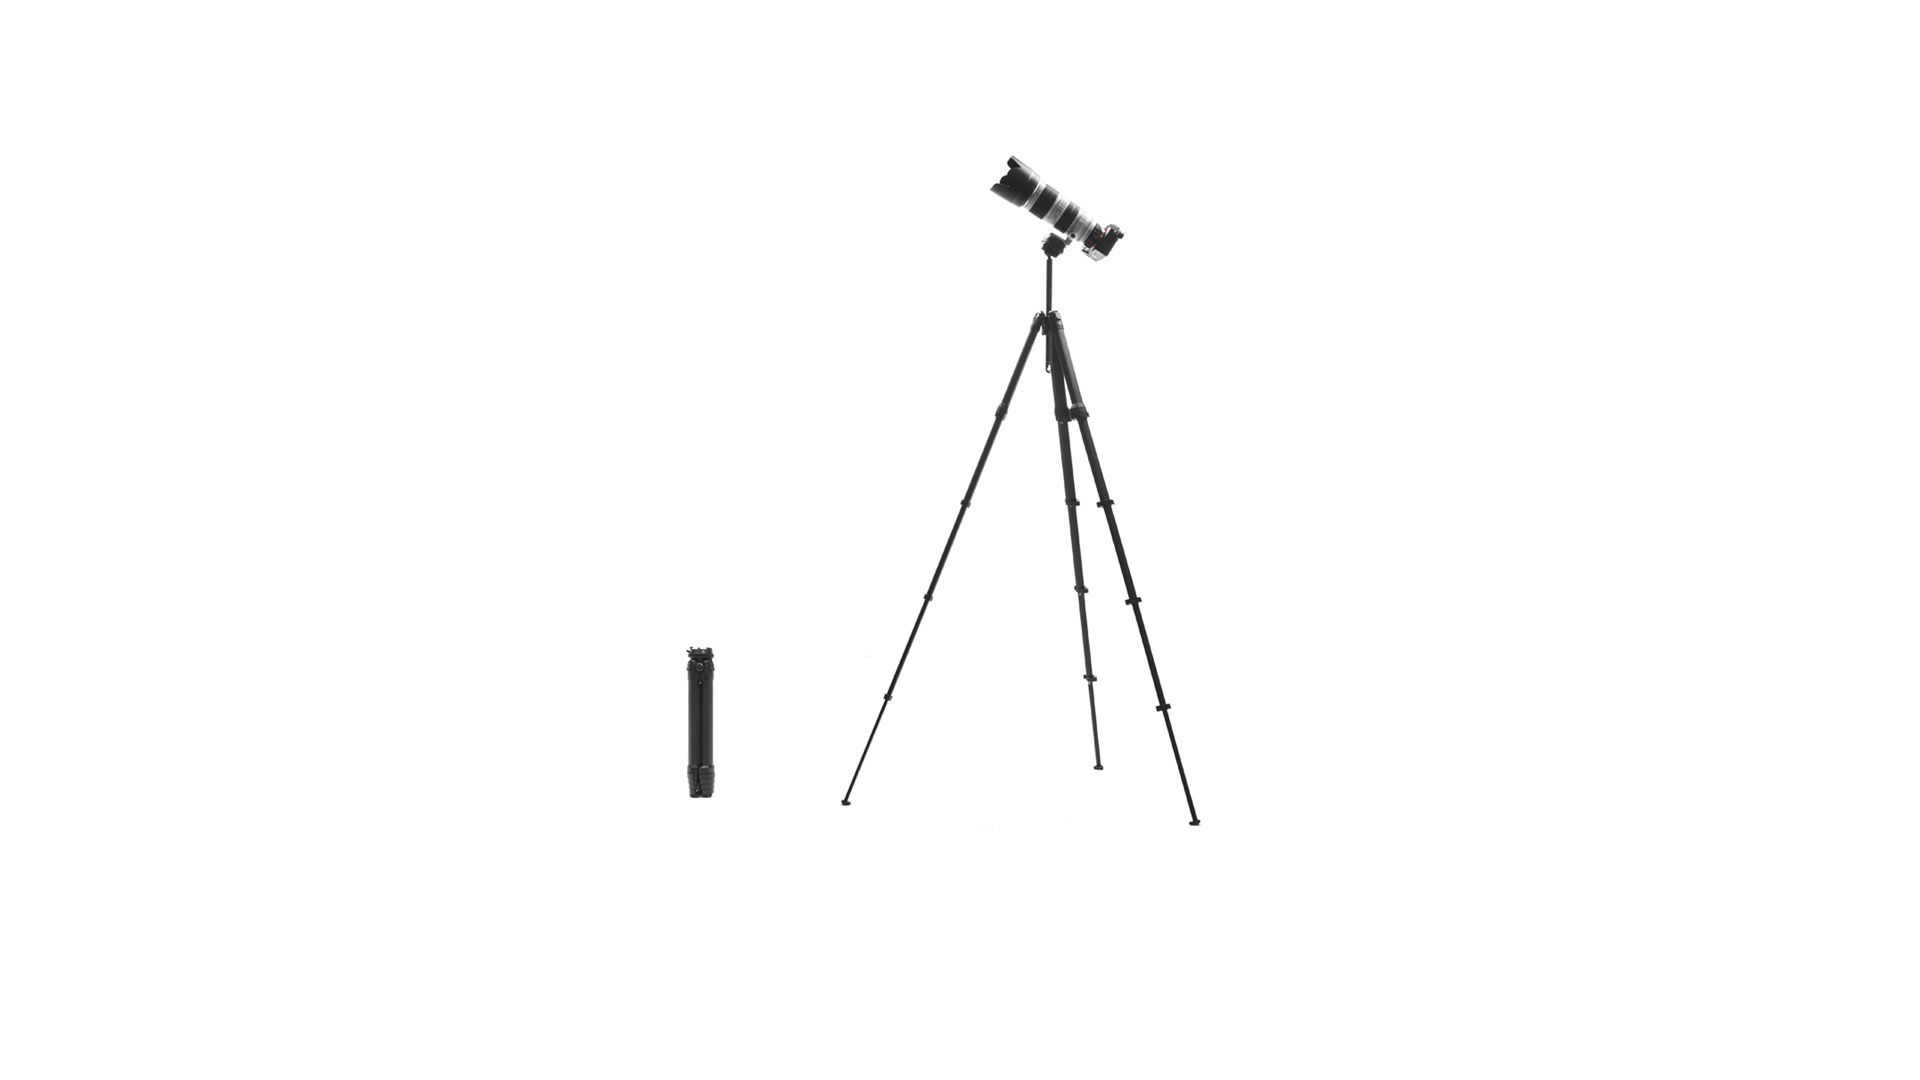 Peak Design Travel Tripod Review: Image shows Tripod extended with Camera attached